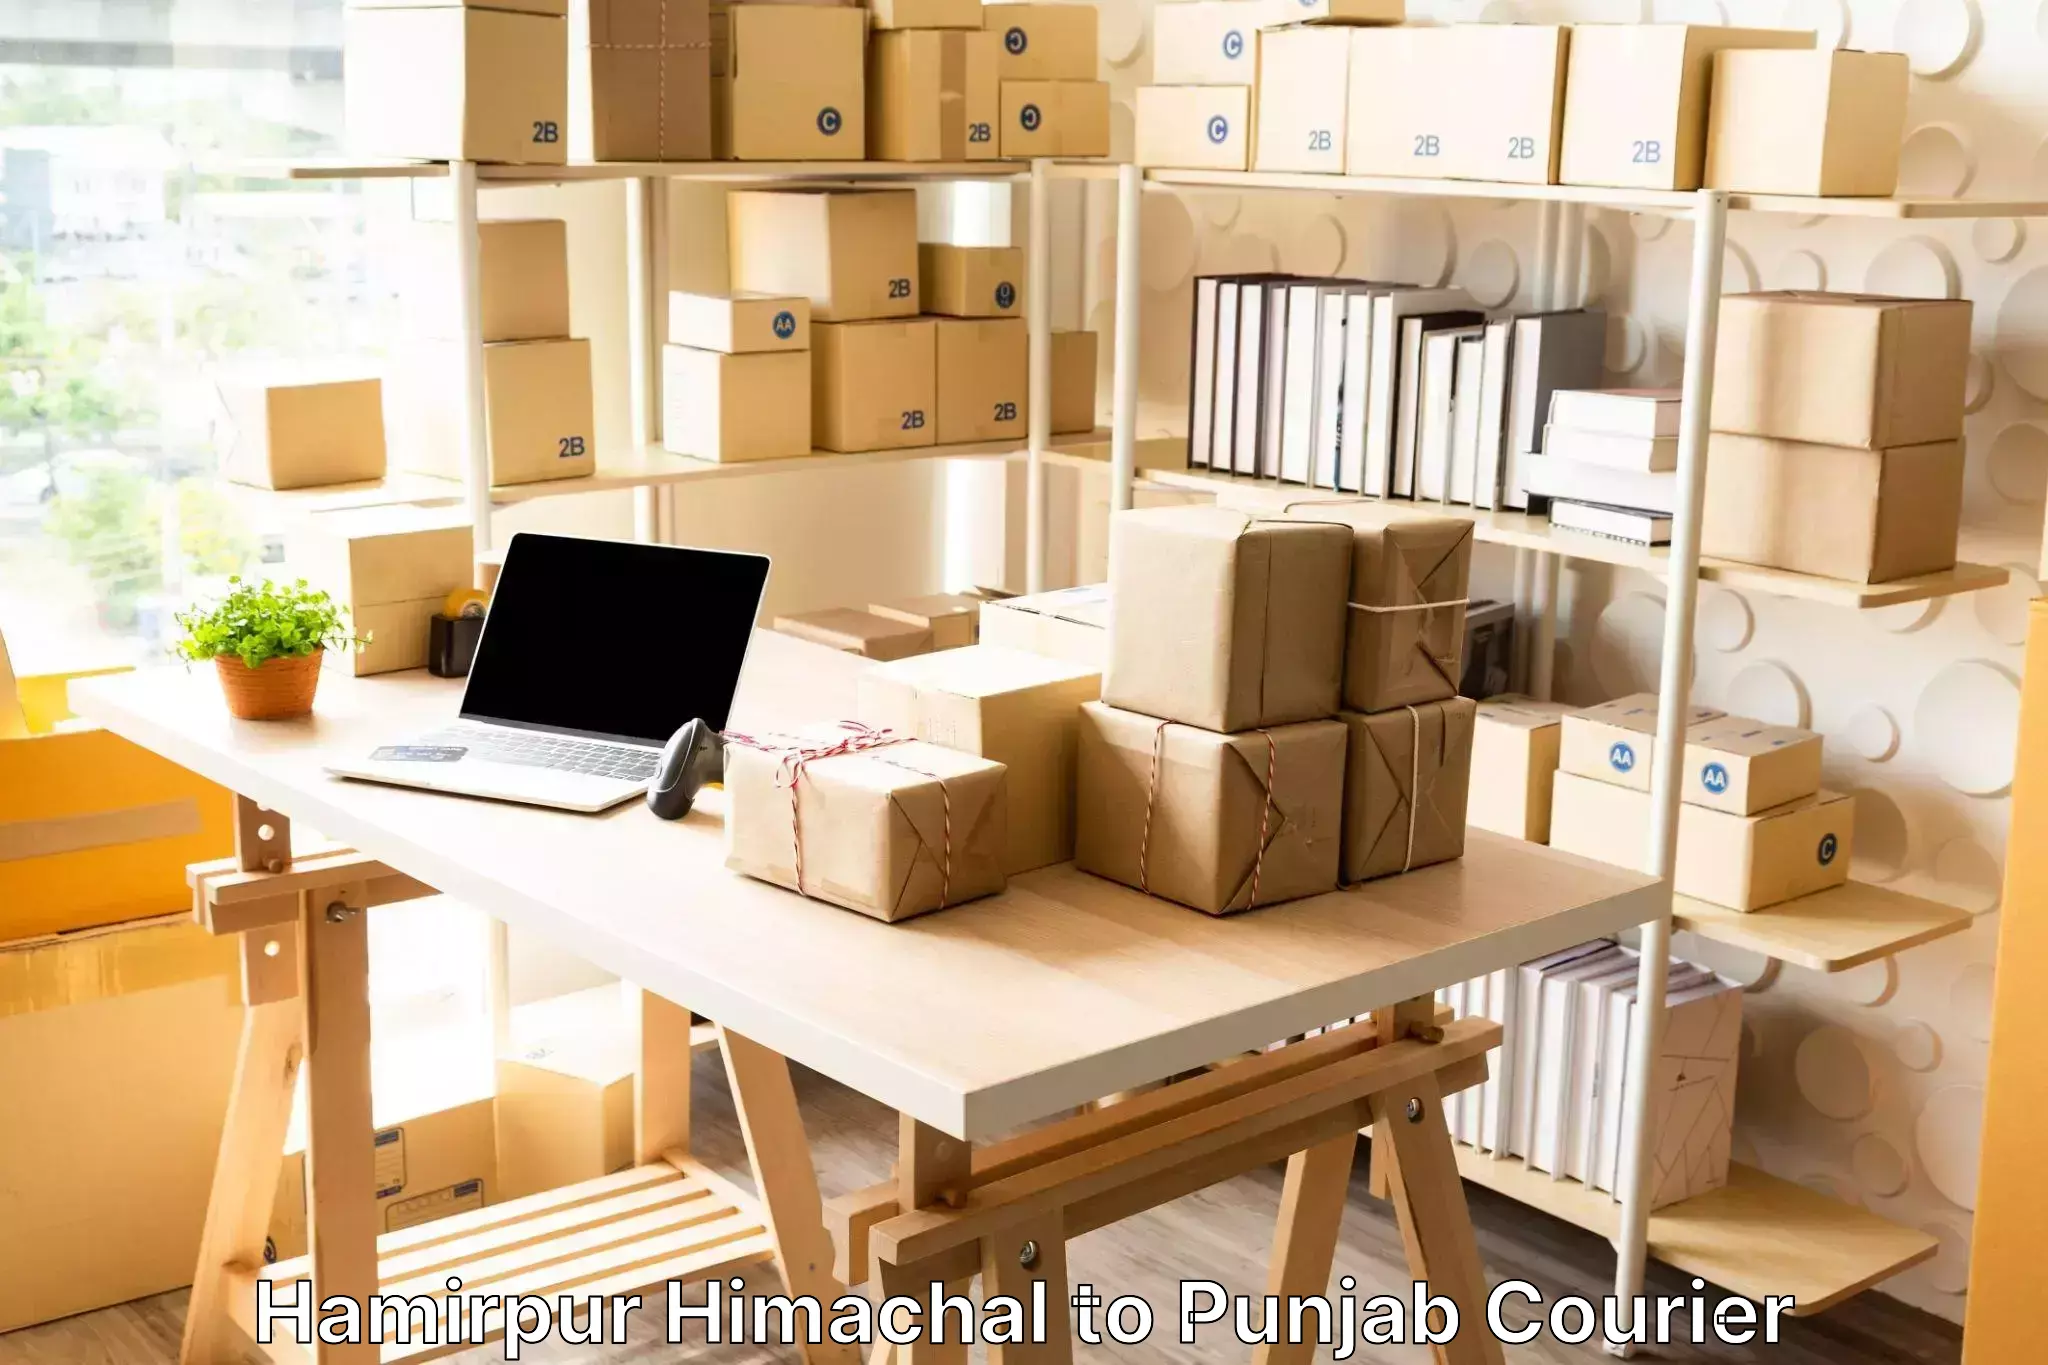 Luggage shipping service in Hamirpur Himachal to Zirakpur